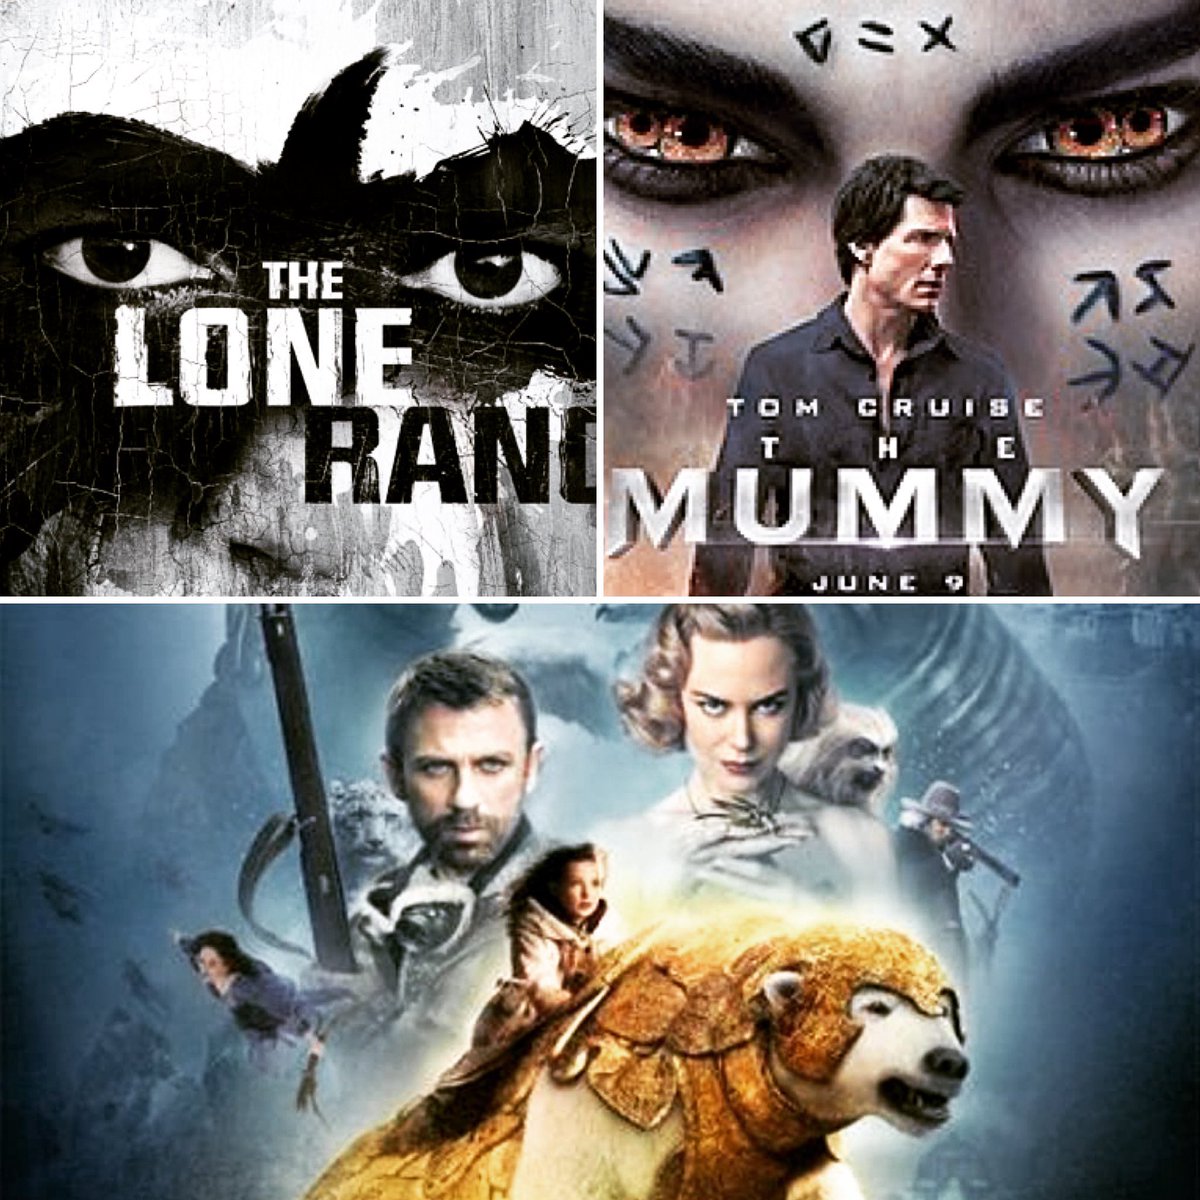 For our most recent One Shot, we looked at box office bombs, and talked about #themummy #loneranger and #thegoldencompass!